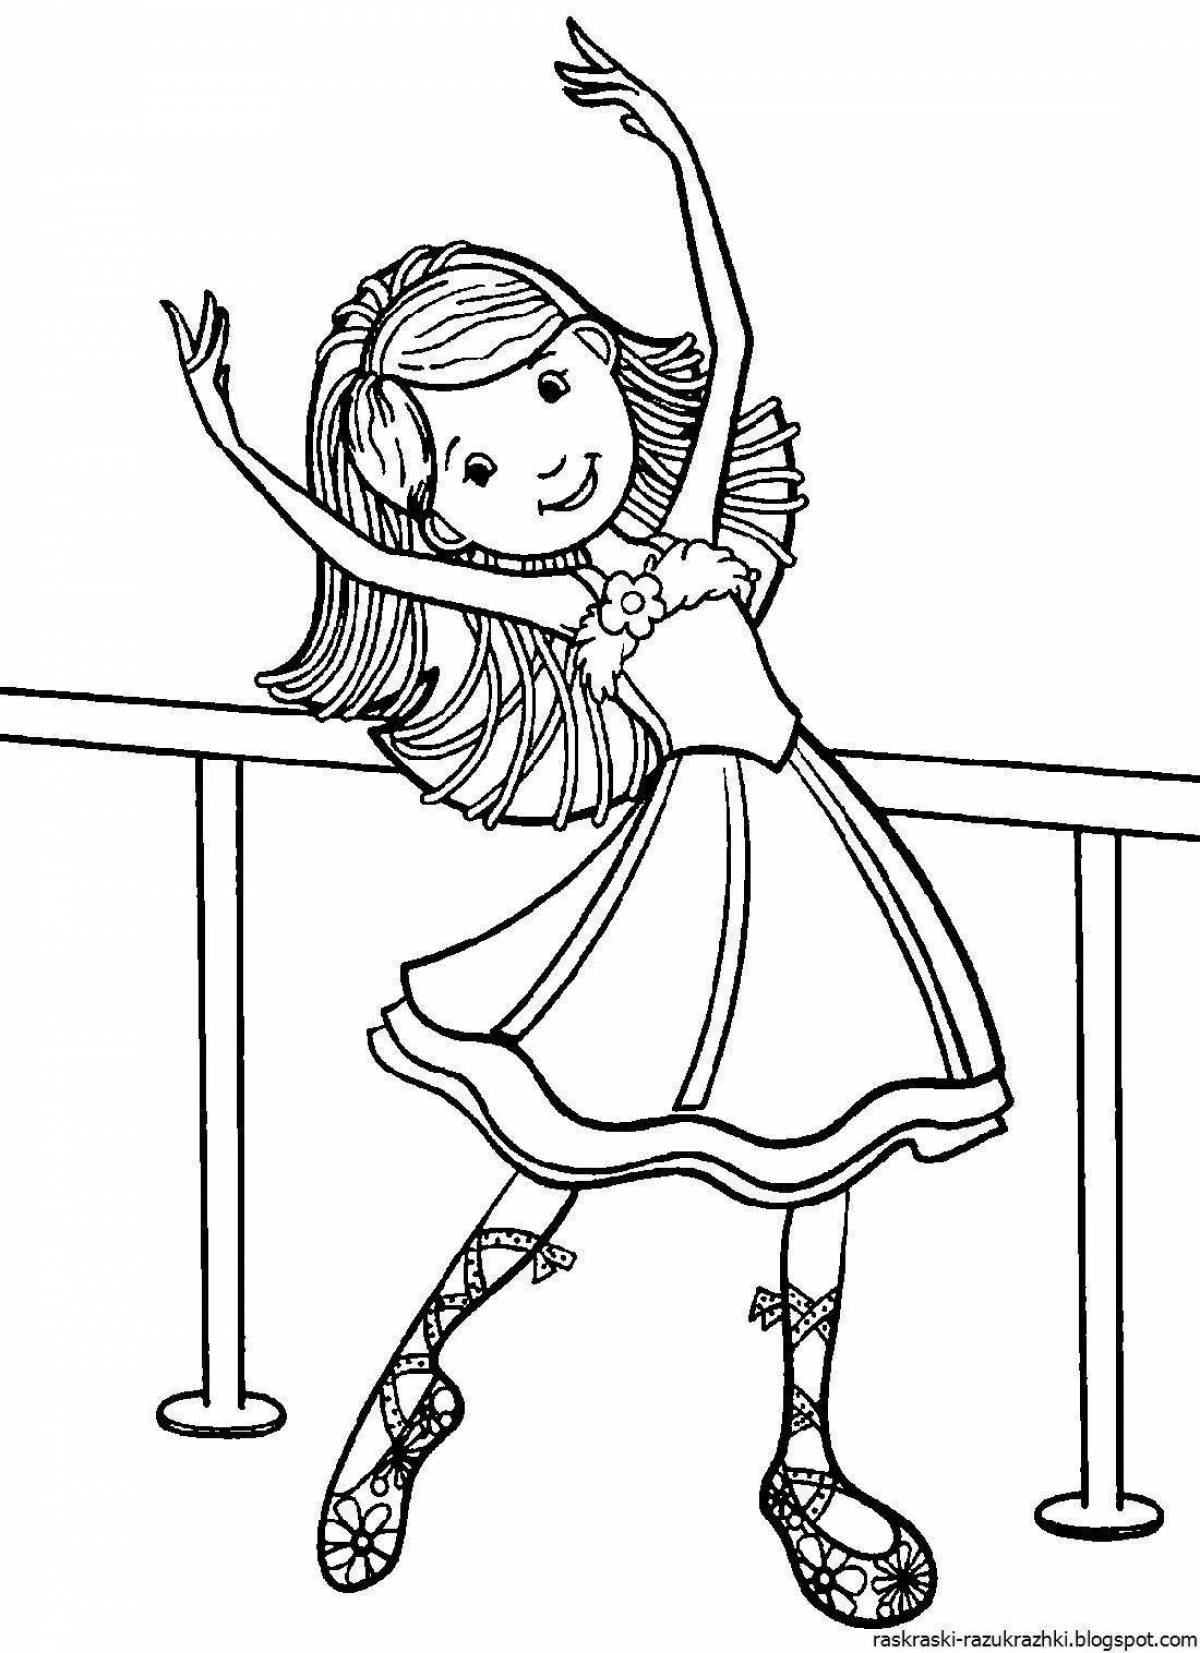 Coloring page wild dancing girl